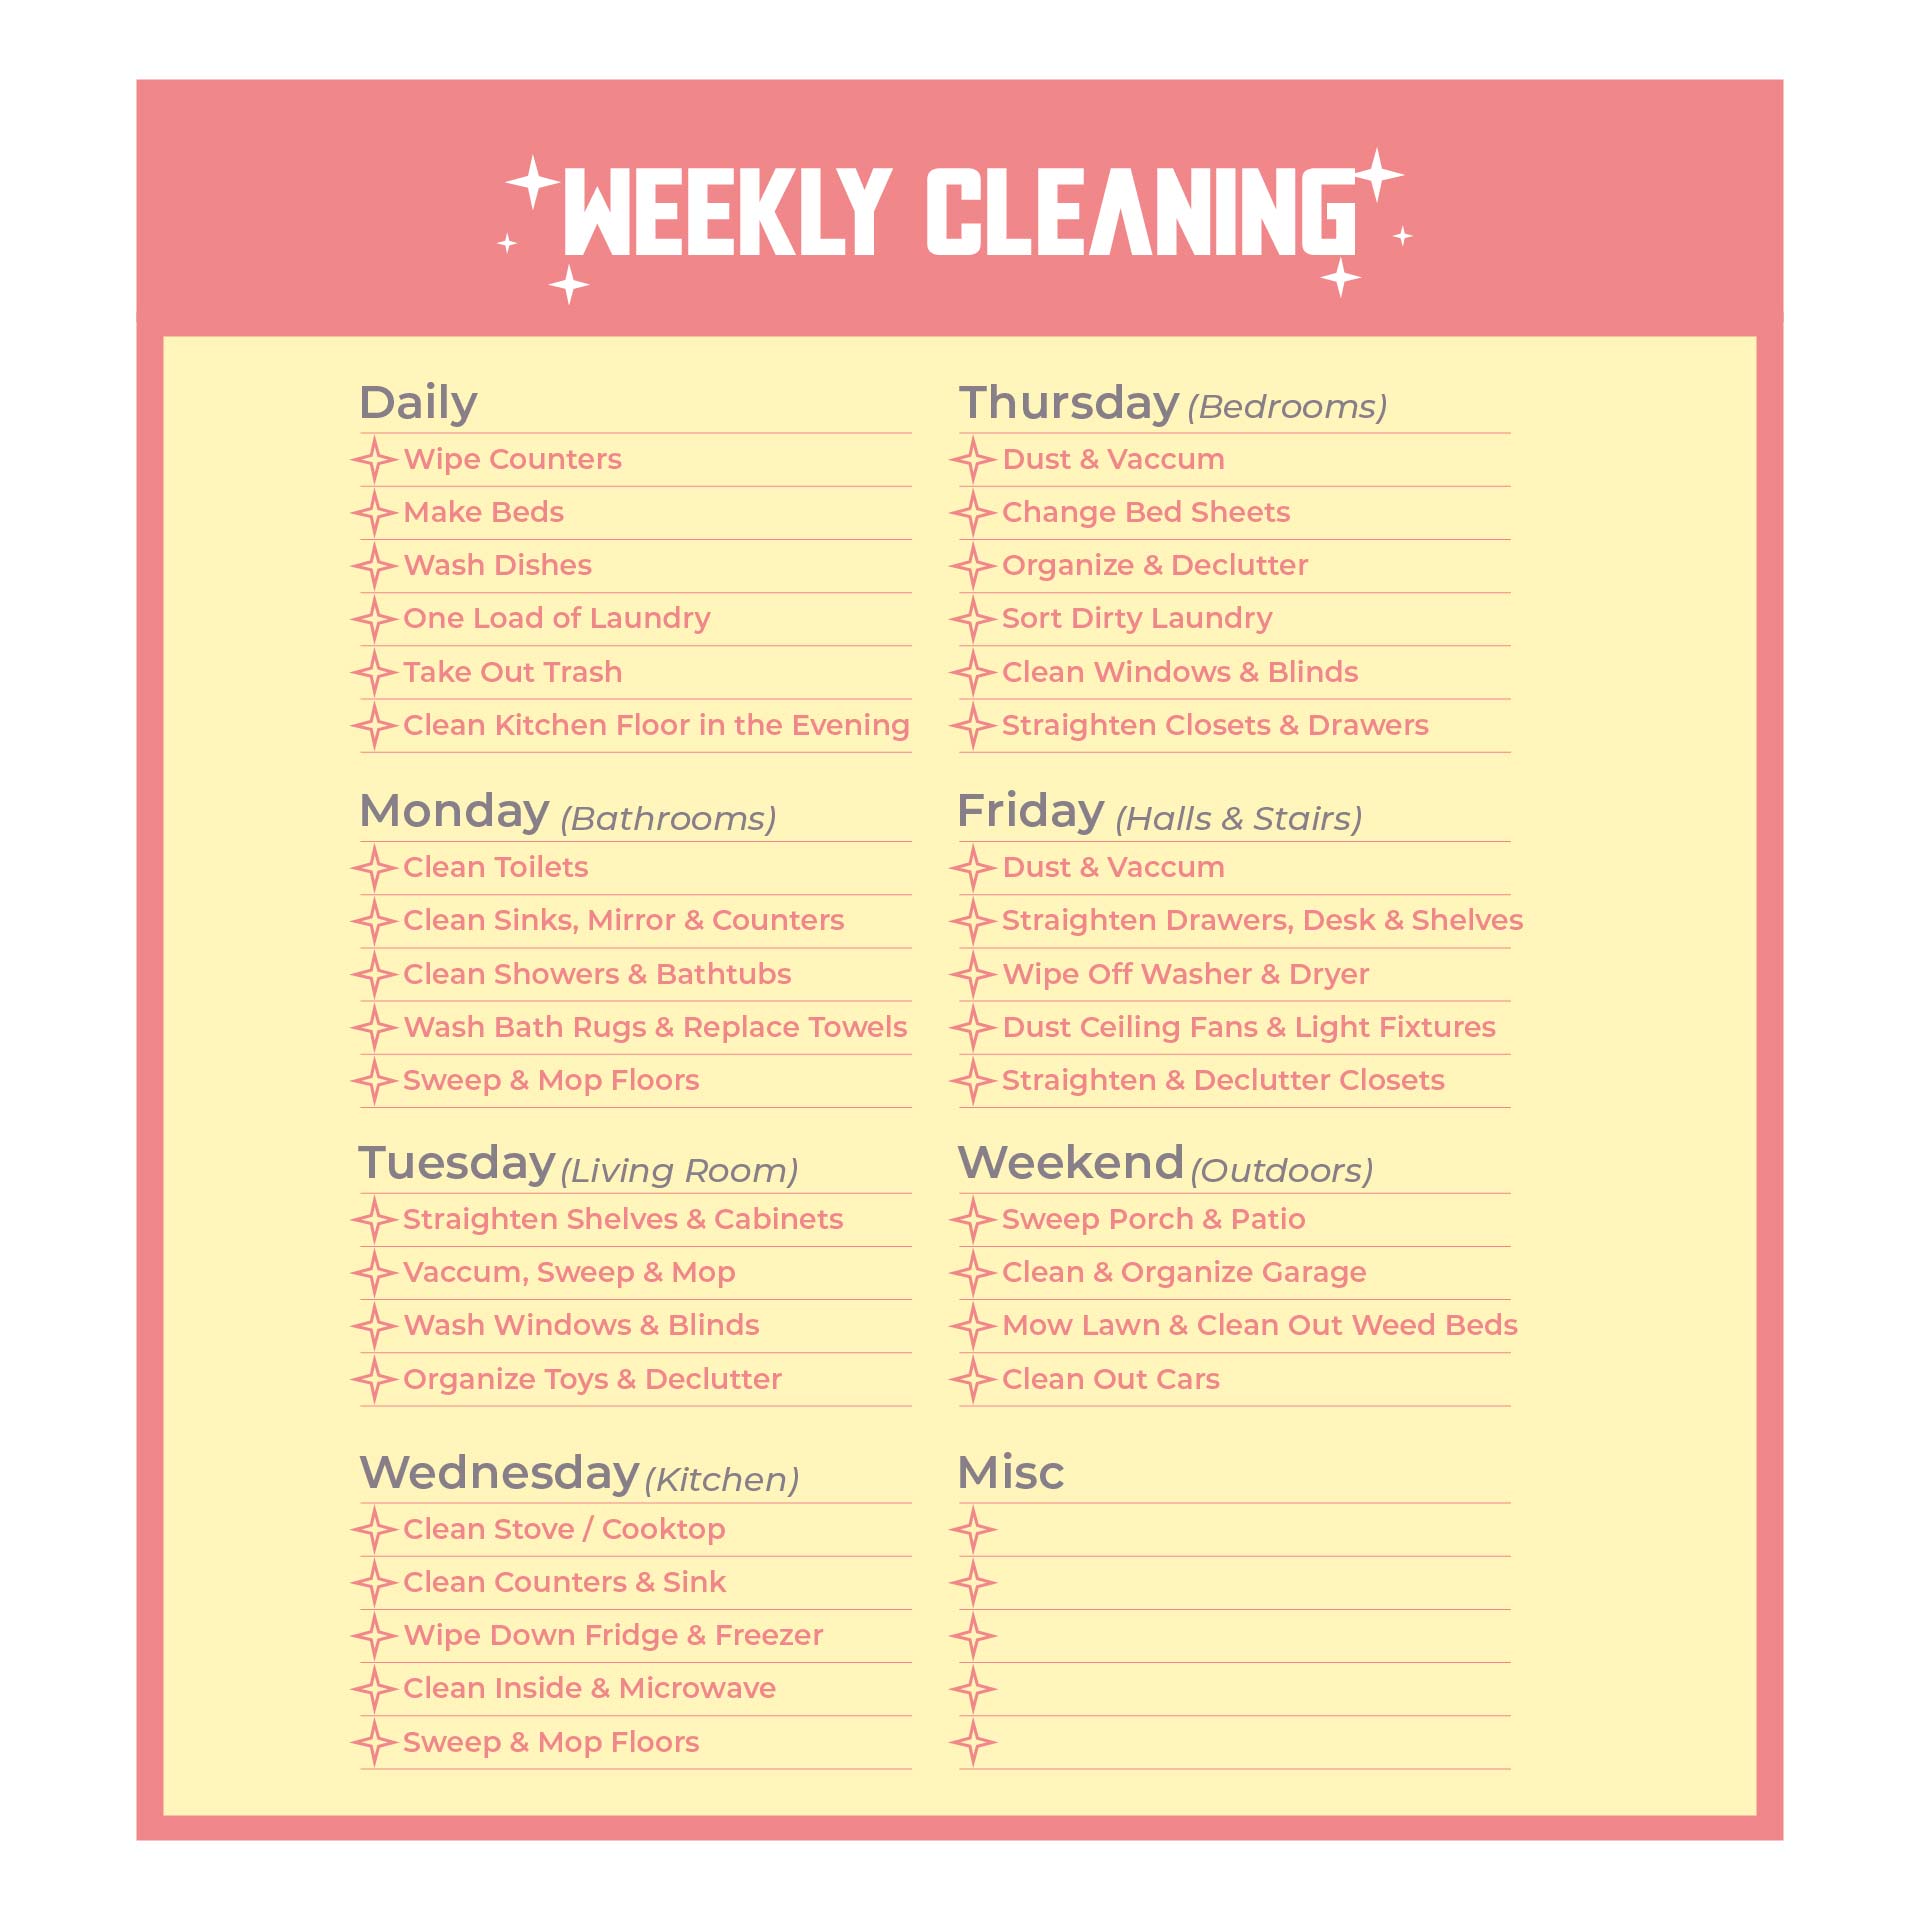 8-best-images-of-printable-monthly-cleaning-checklist-monthly-cleaning-checklists-free